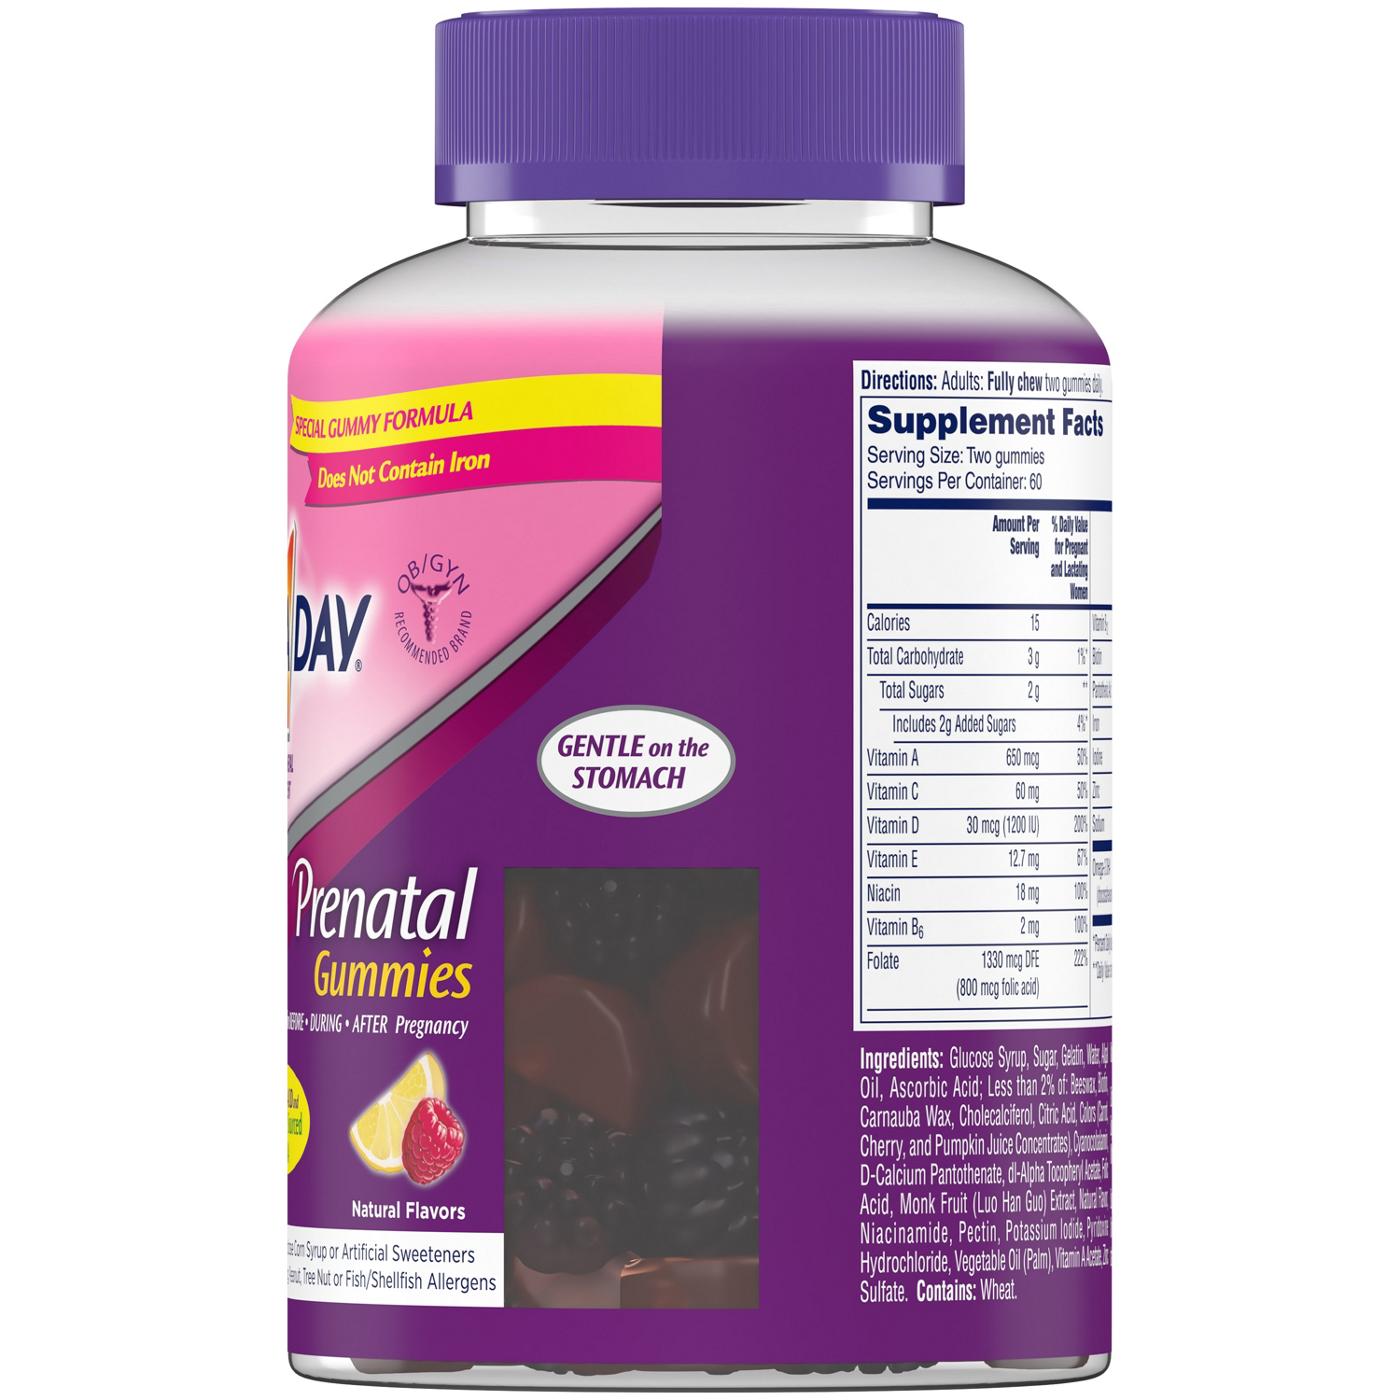 One A Day Womens Prenatal Gummies; image 6 of 6